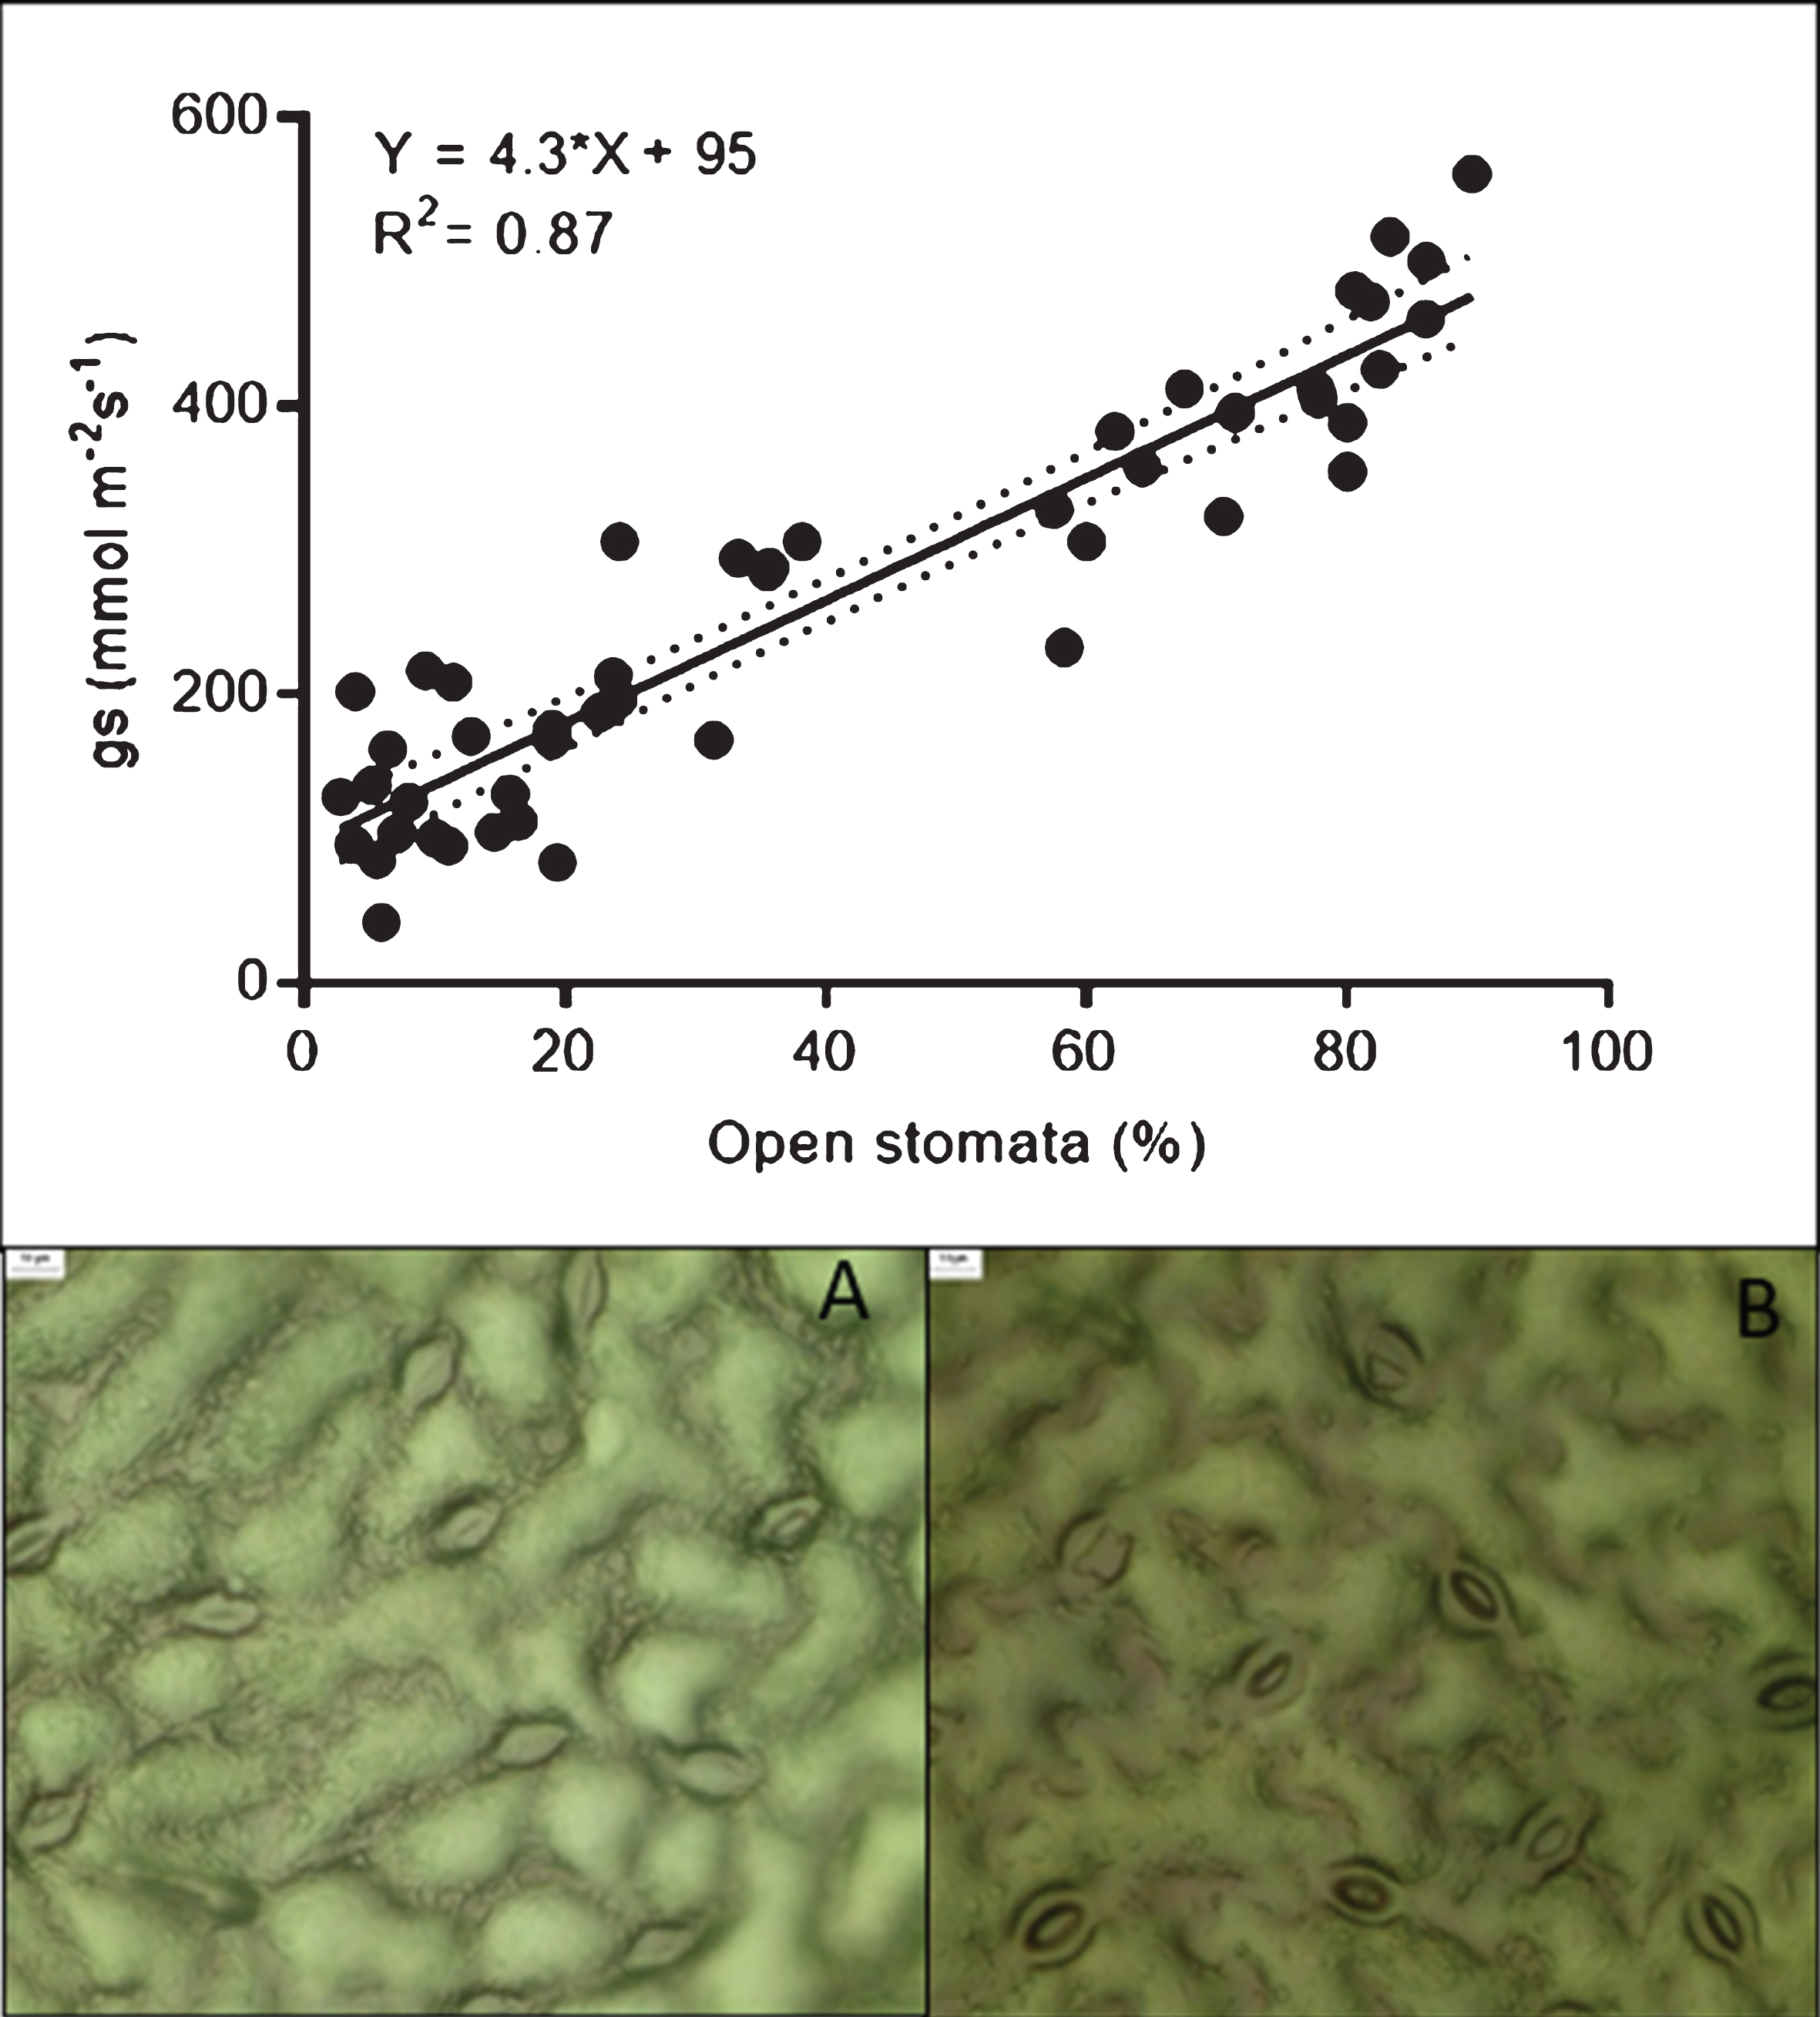 The upper figure shows the relationship between stomatal conductance and stomatal opening. Figures A and B show views of stomata impressions prepared at gs values of 86 and 480 mmol m−2 s−1, respectively.